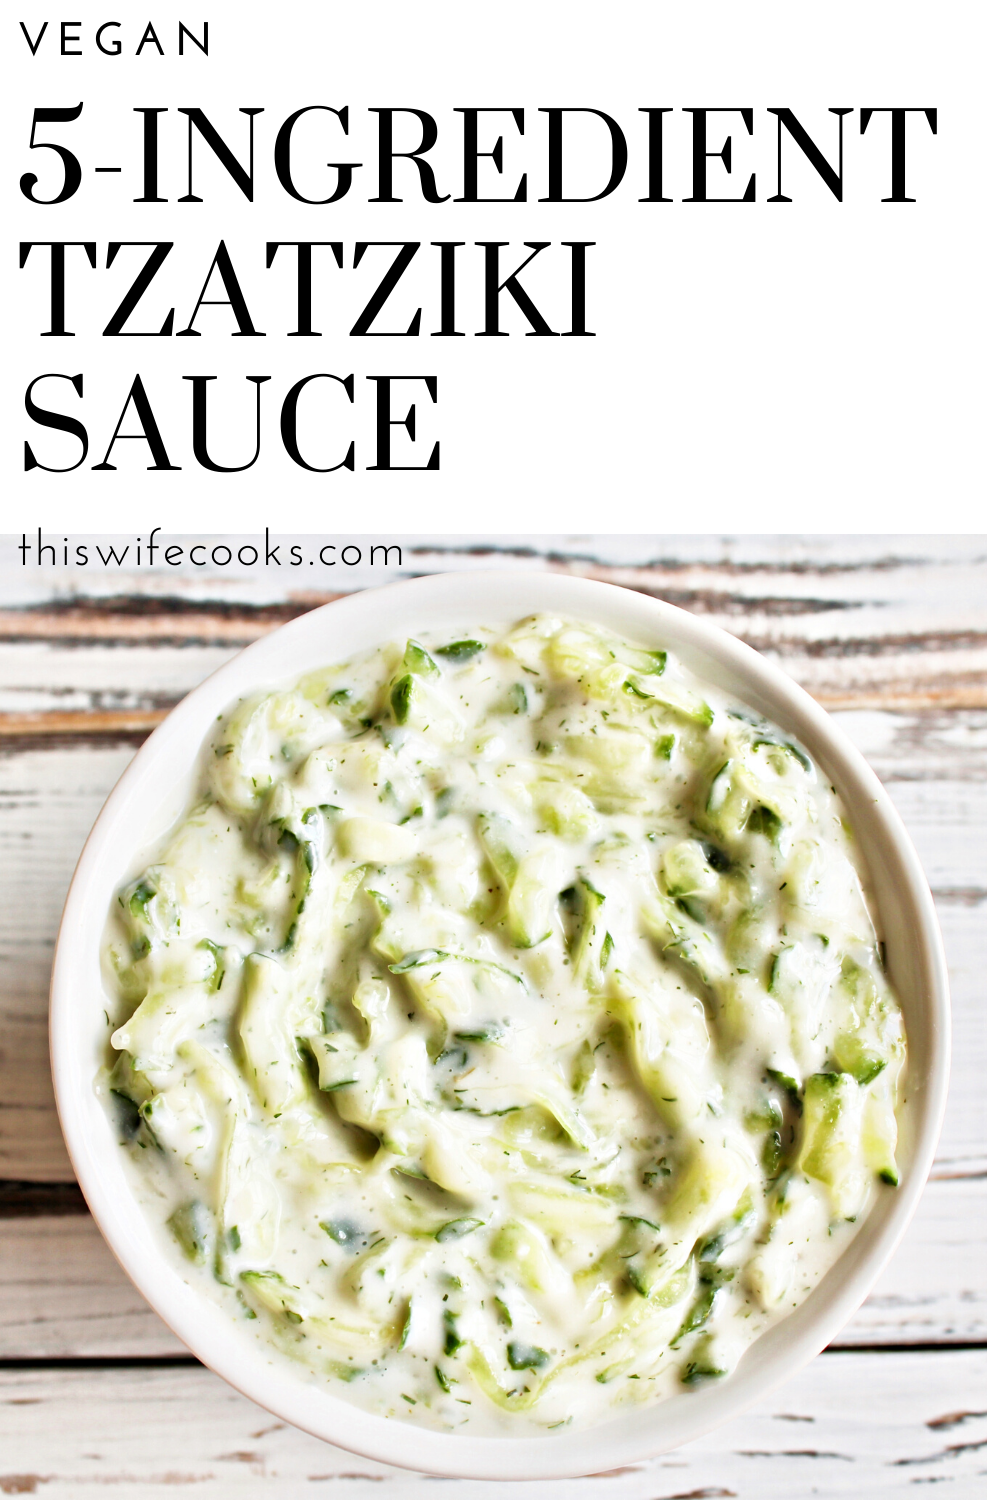 5-Ingredient Vegan Tzatziki Sauce - Add Mediterrranean flair to fresh vegetables & pita bread, sandwiches & wraps. Drizzle over falafel, kabobs, burgers, or use as a  dressing for salads. via @thiswifecooks